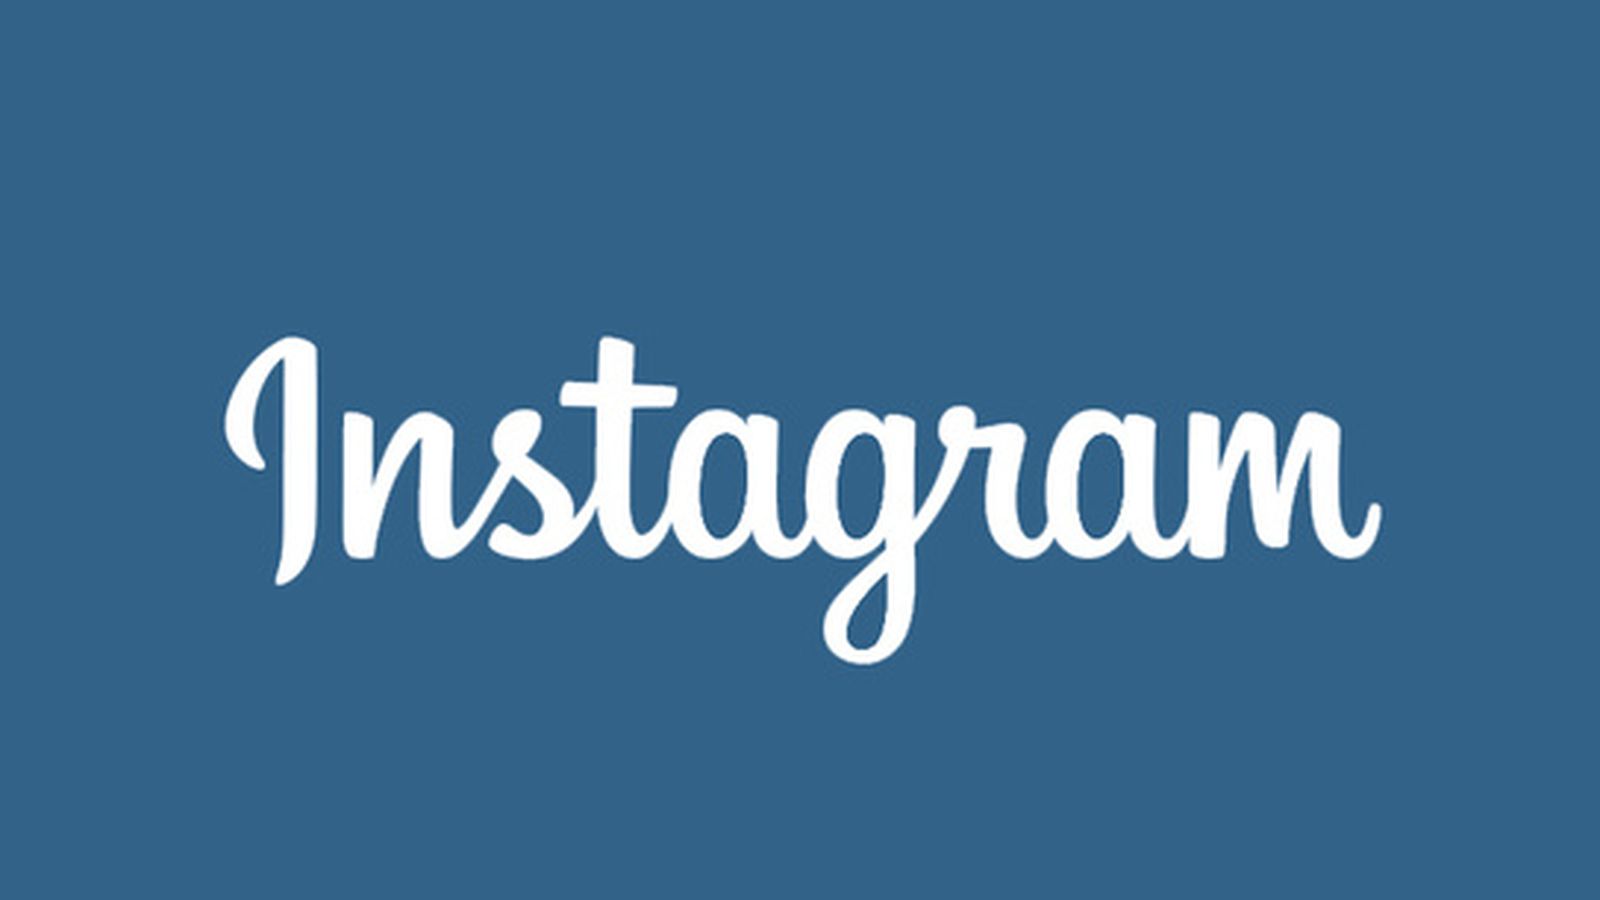 Instagram filters out the noise with redesigned logo - The ...